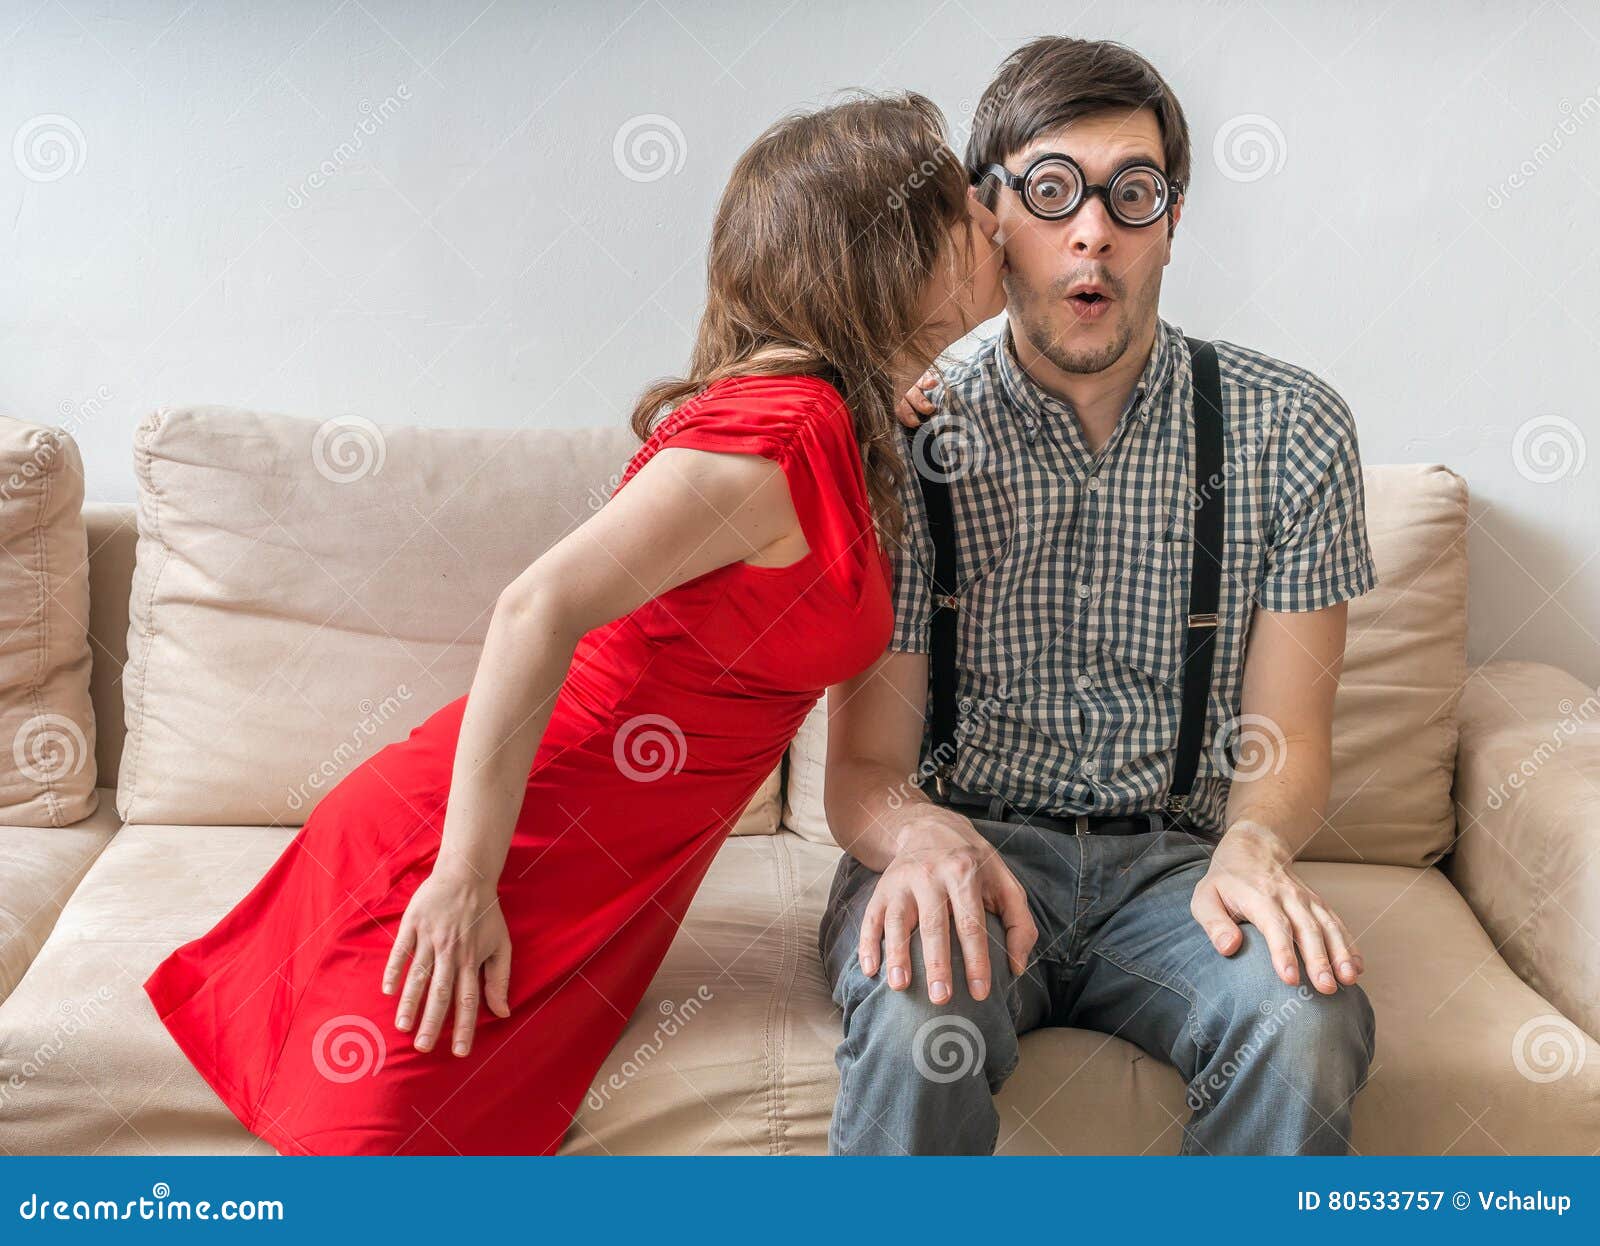 Shy Man Is Surprised By Kiss From Woman Sitting On Sofa Dating Concept Stock Image Image Of